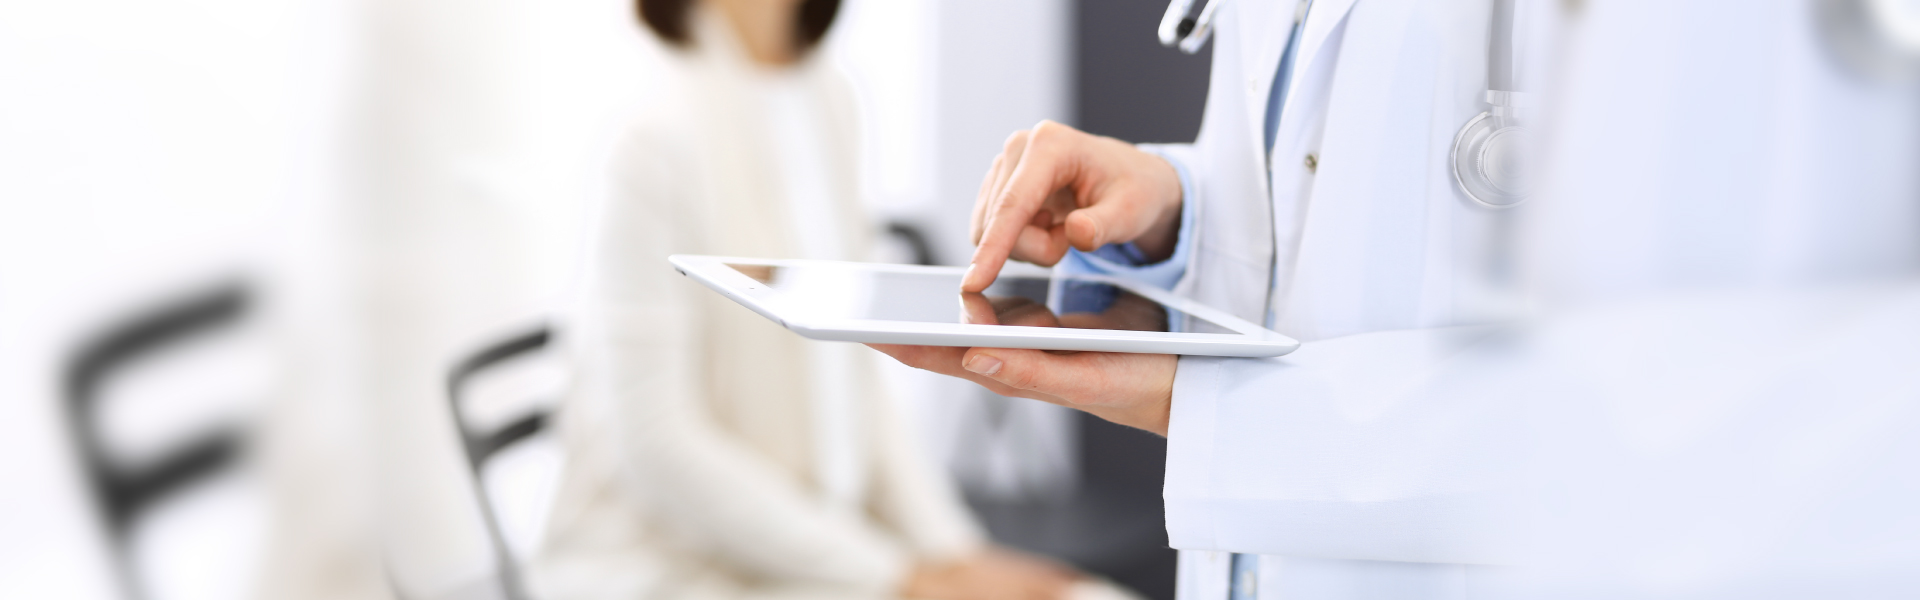 Implementation of Electronic Signatures in Healthcare Organizations